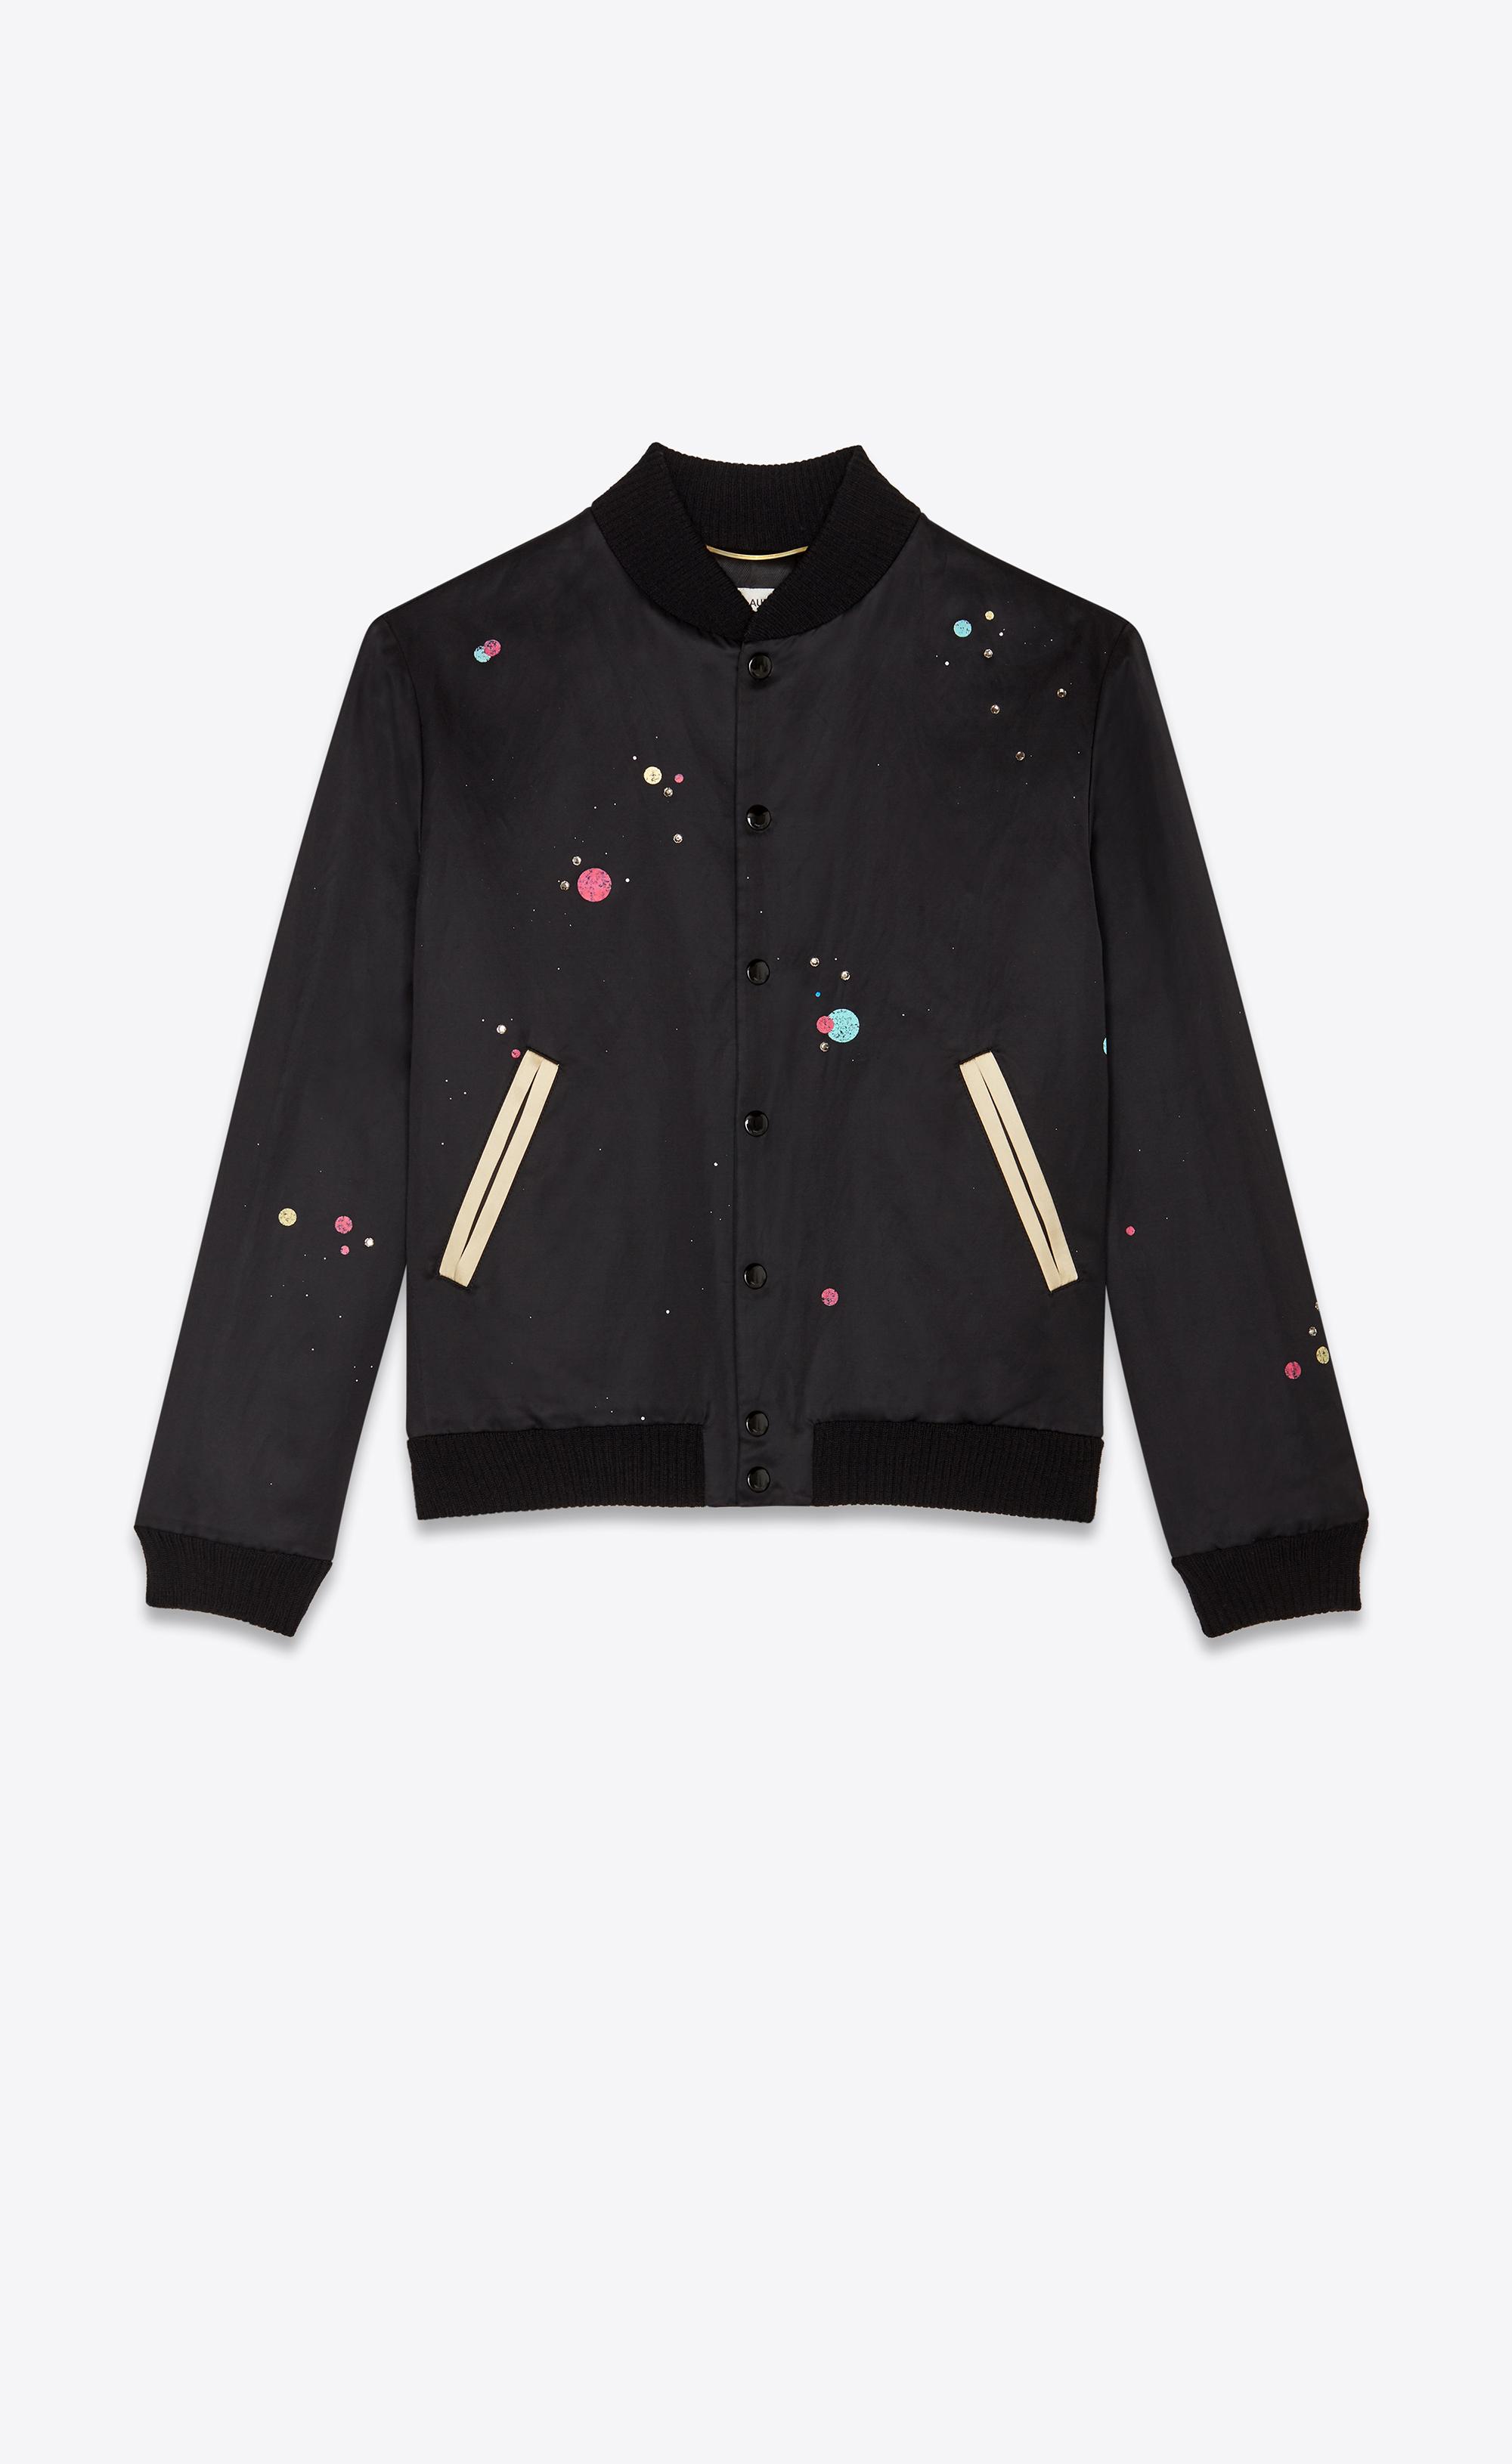 Saint Laurent Embroidered Varsity Jacket With Print in Black - Lyst